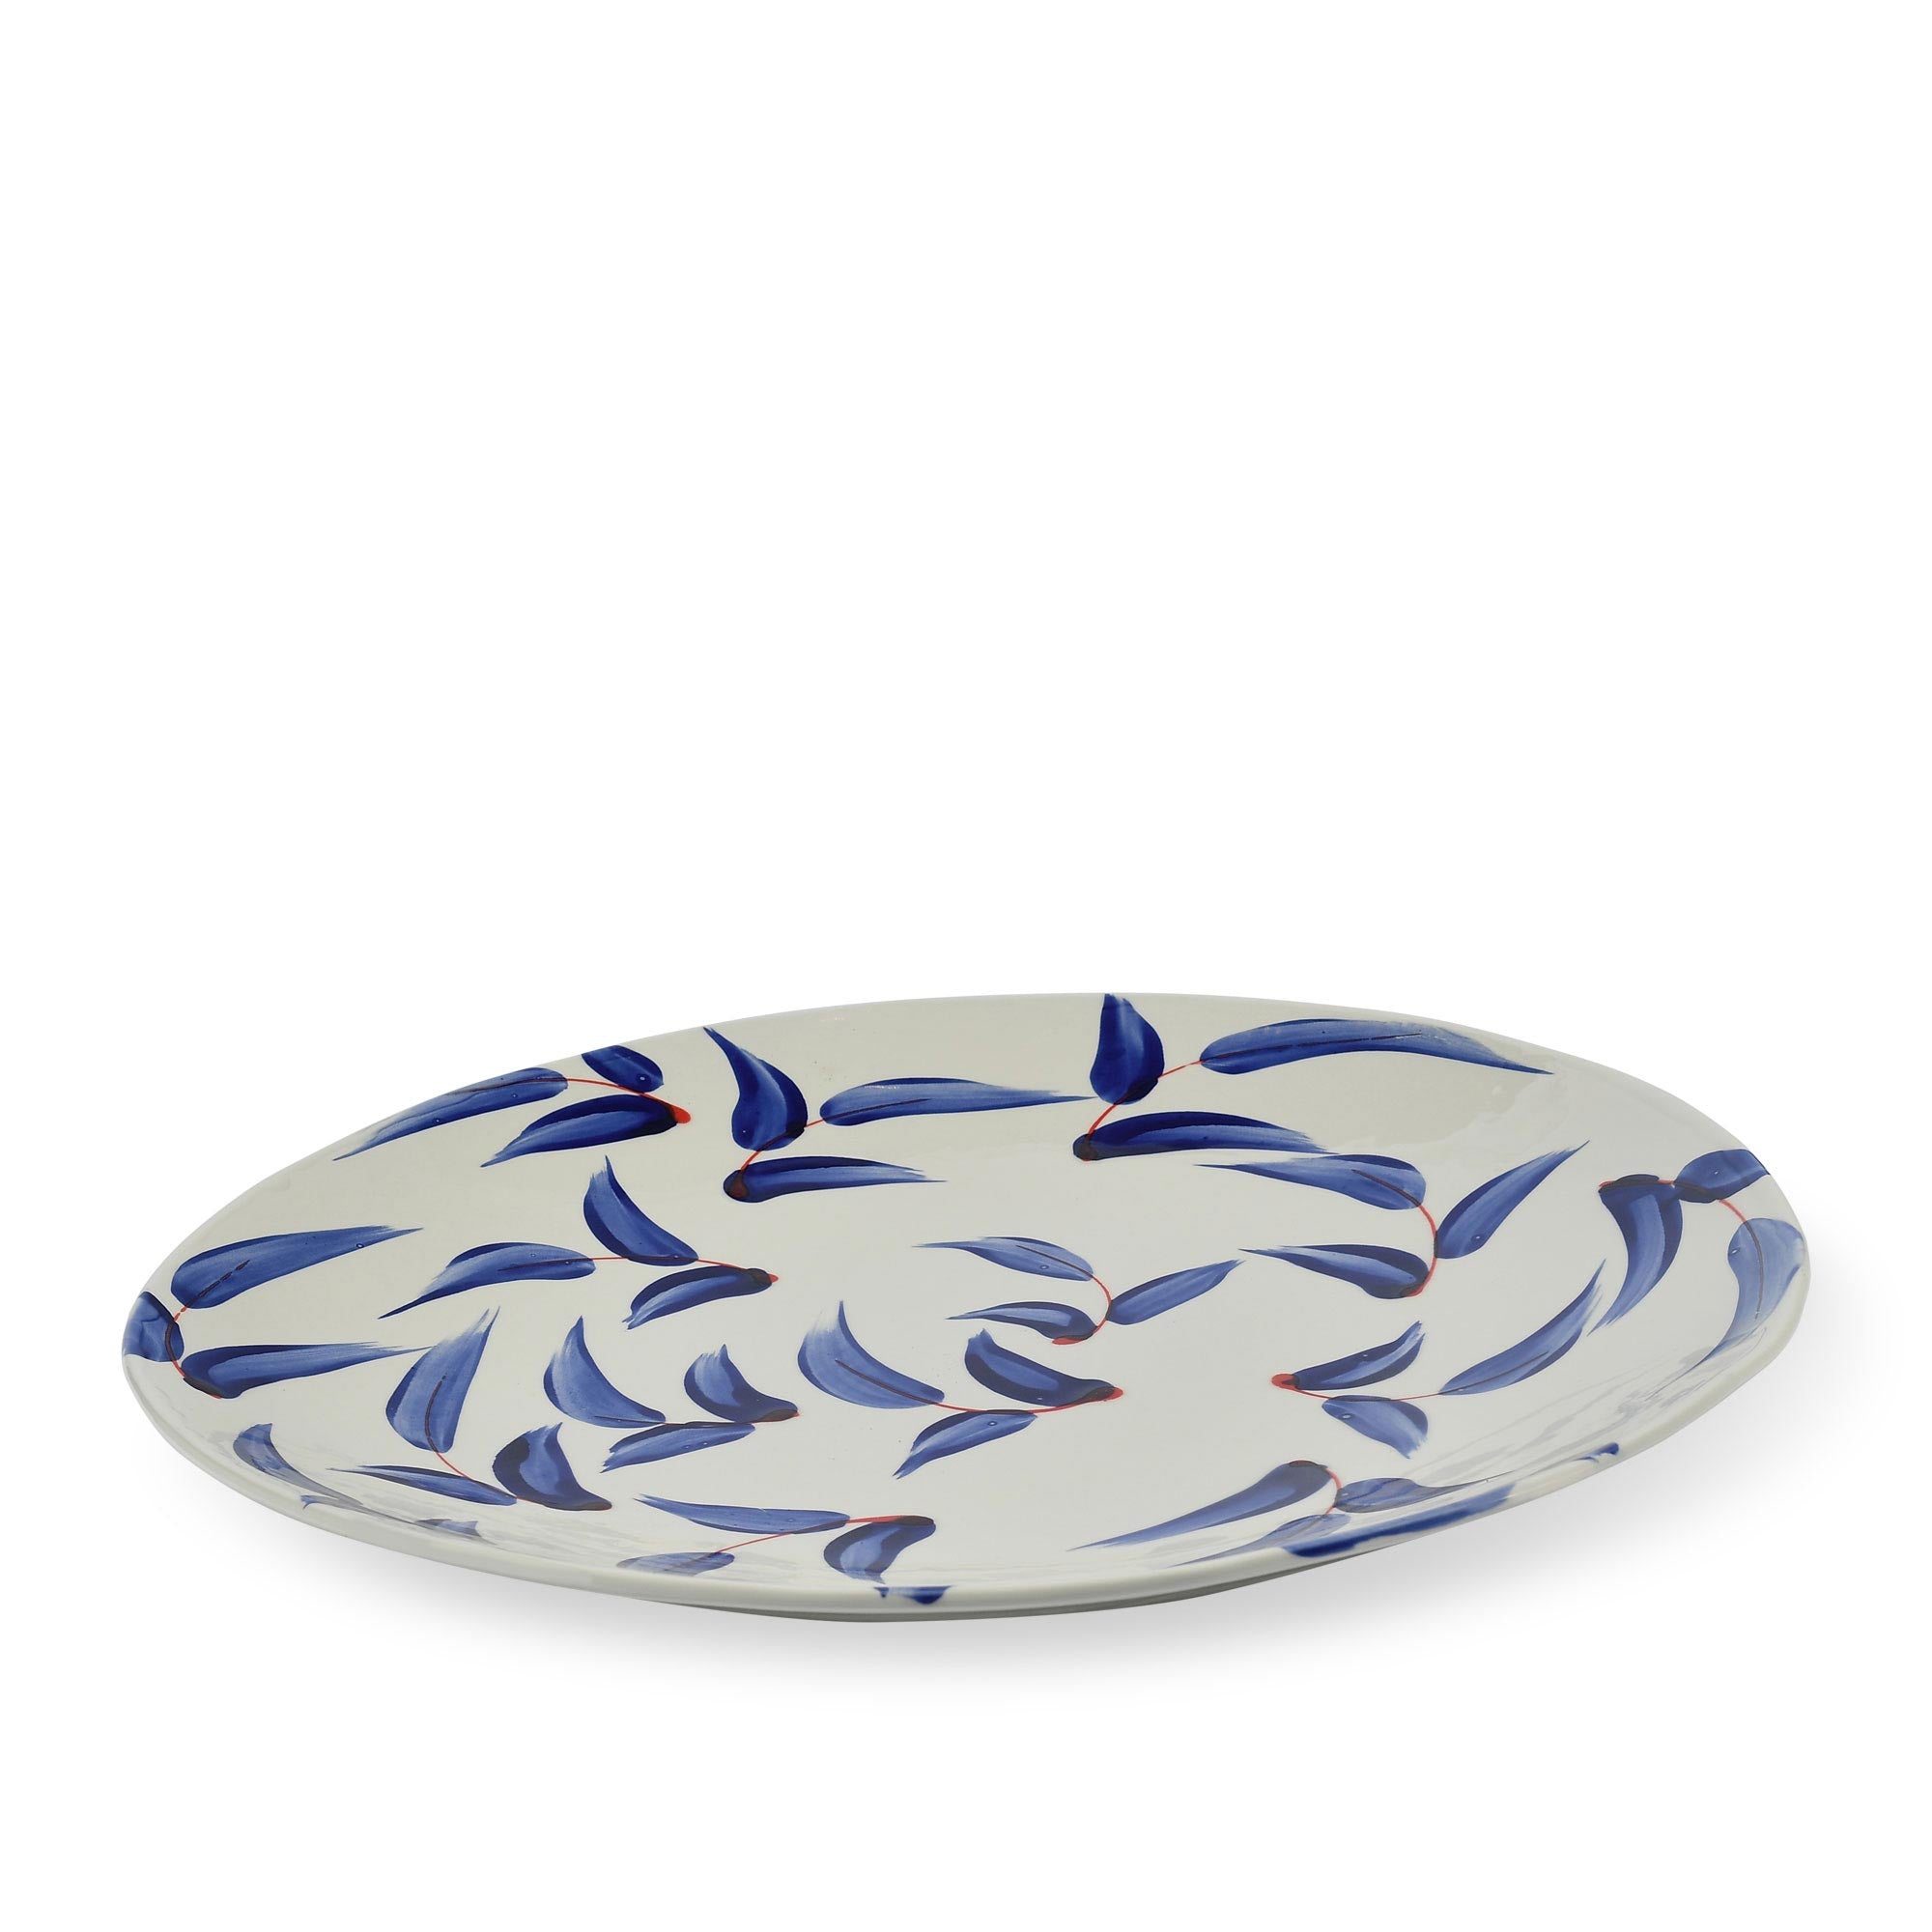 Ceramic%20Round%20Serving%20Dish%20With%20Three%20Leaves%20Motifs%20With%20Red%20Dots image 1